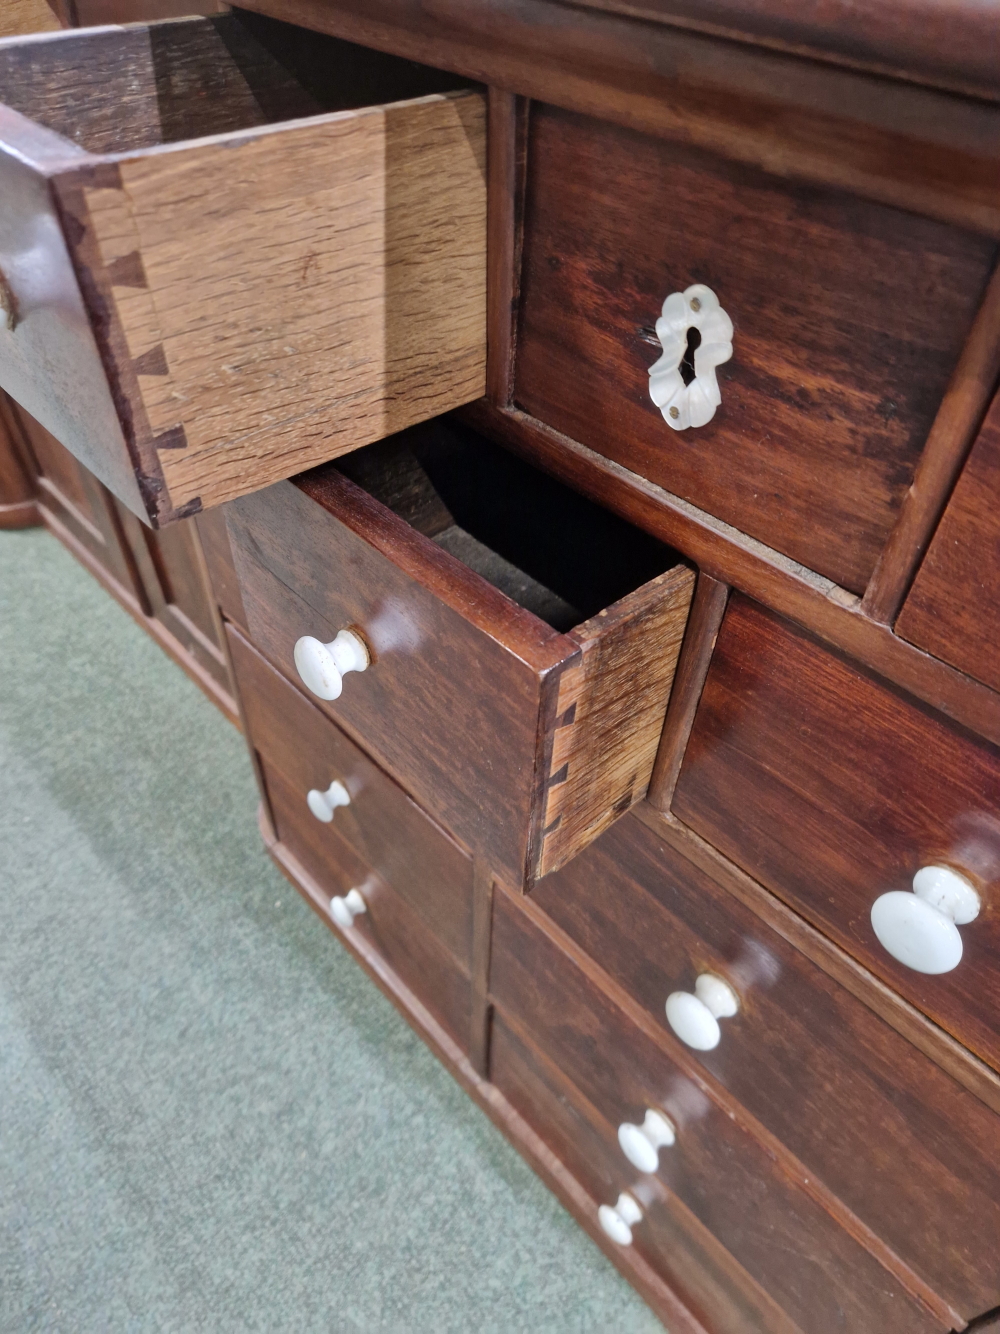 A MAHOGANY SHOP COUNTER FITTED WITH MULTIPLE DRAWERS AND CUPBOARDS EACH WITH WHITE CERAMIC KNOB - Image 21 of 23